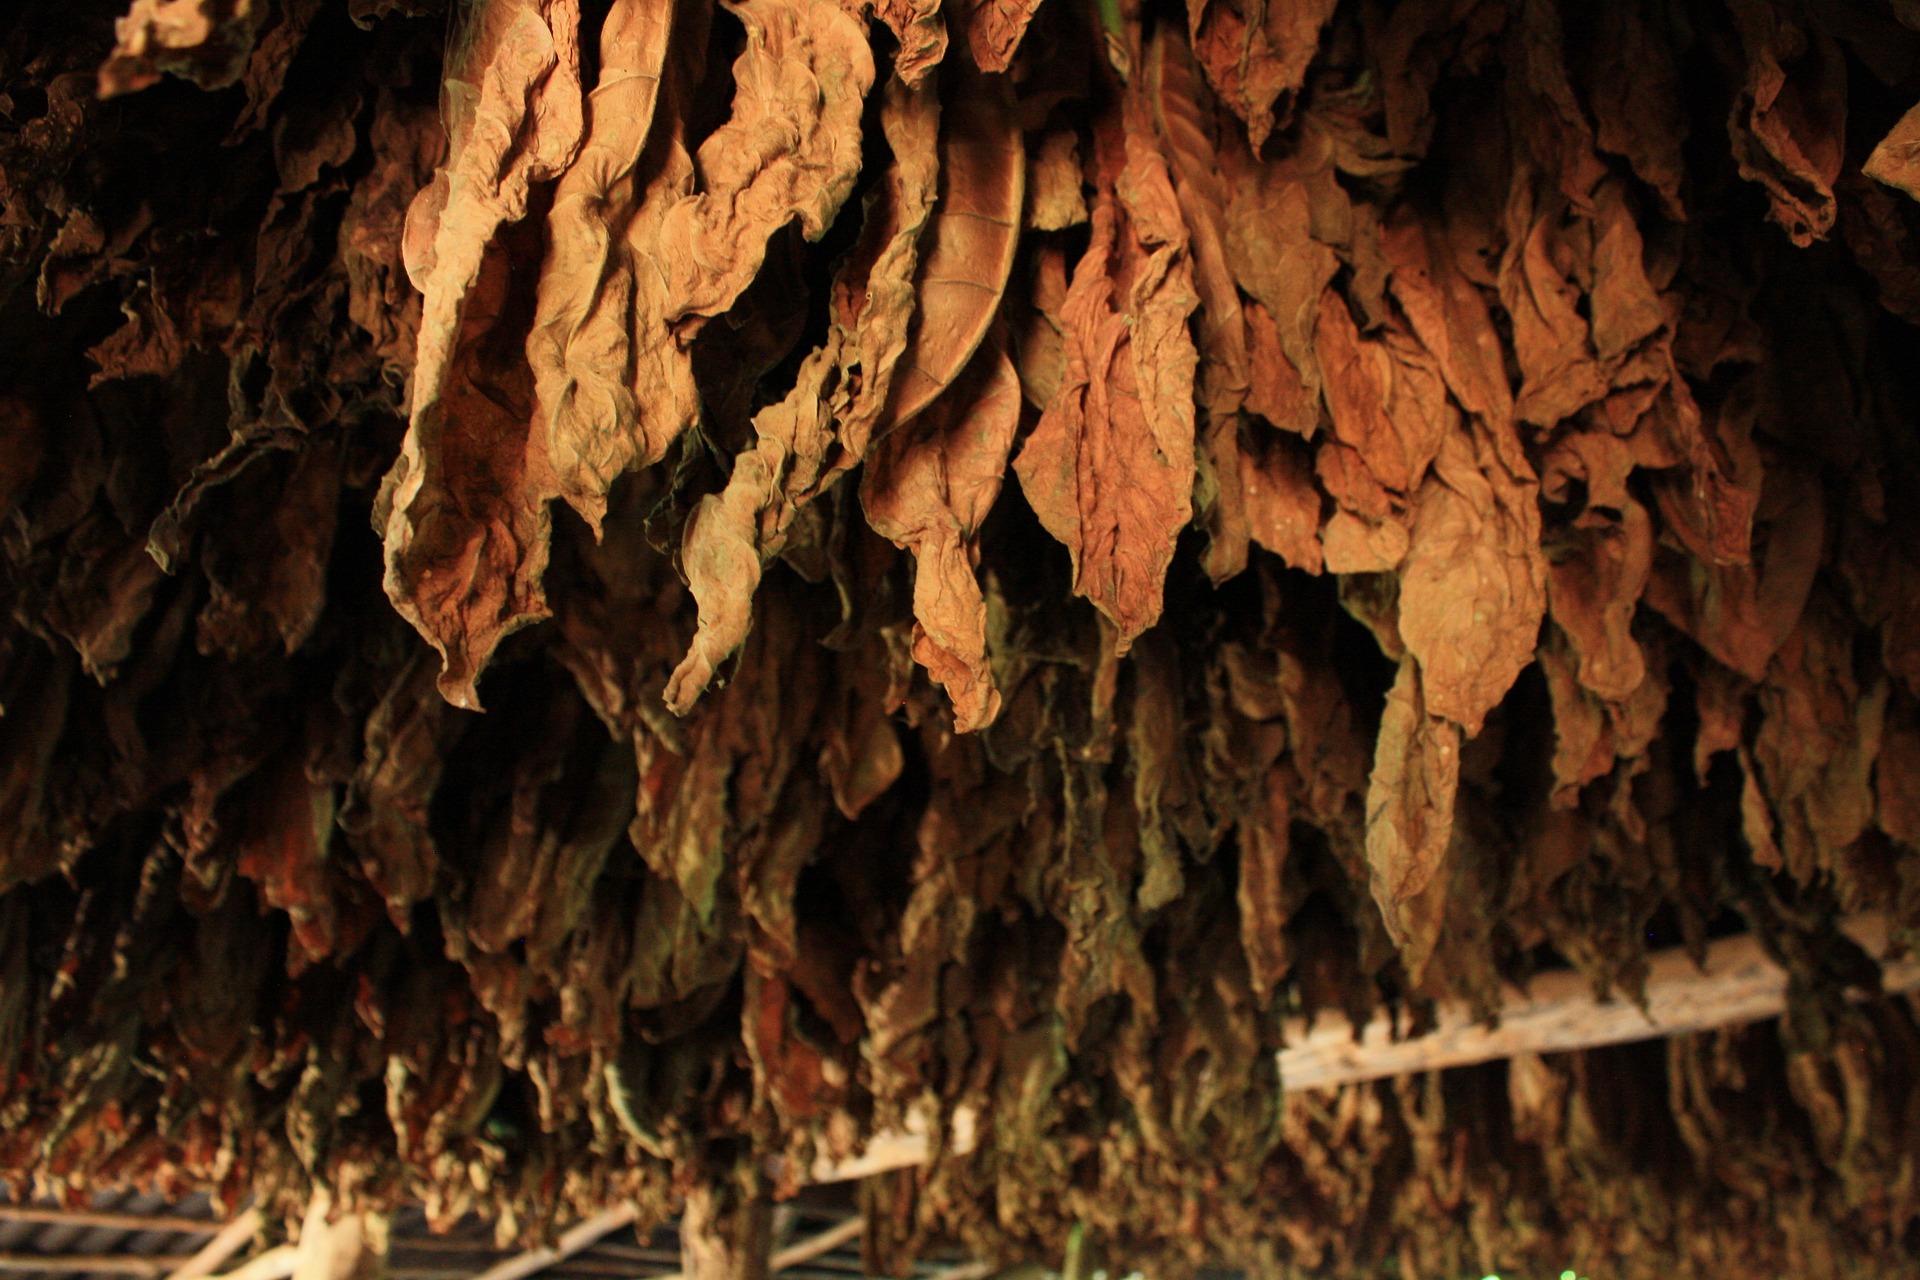 Tobacco leaves hanging in a barn to dry